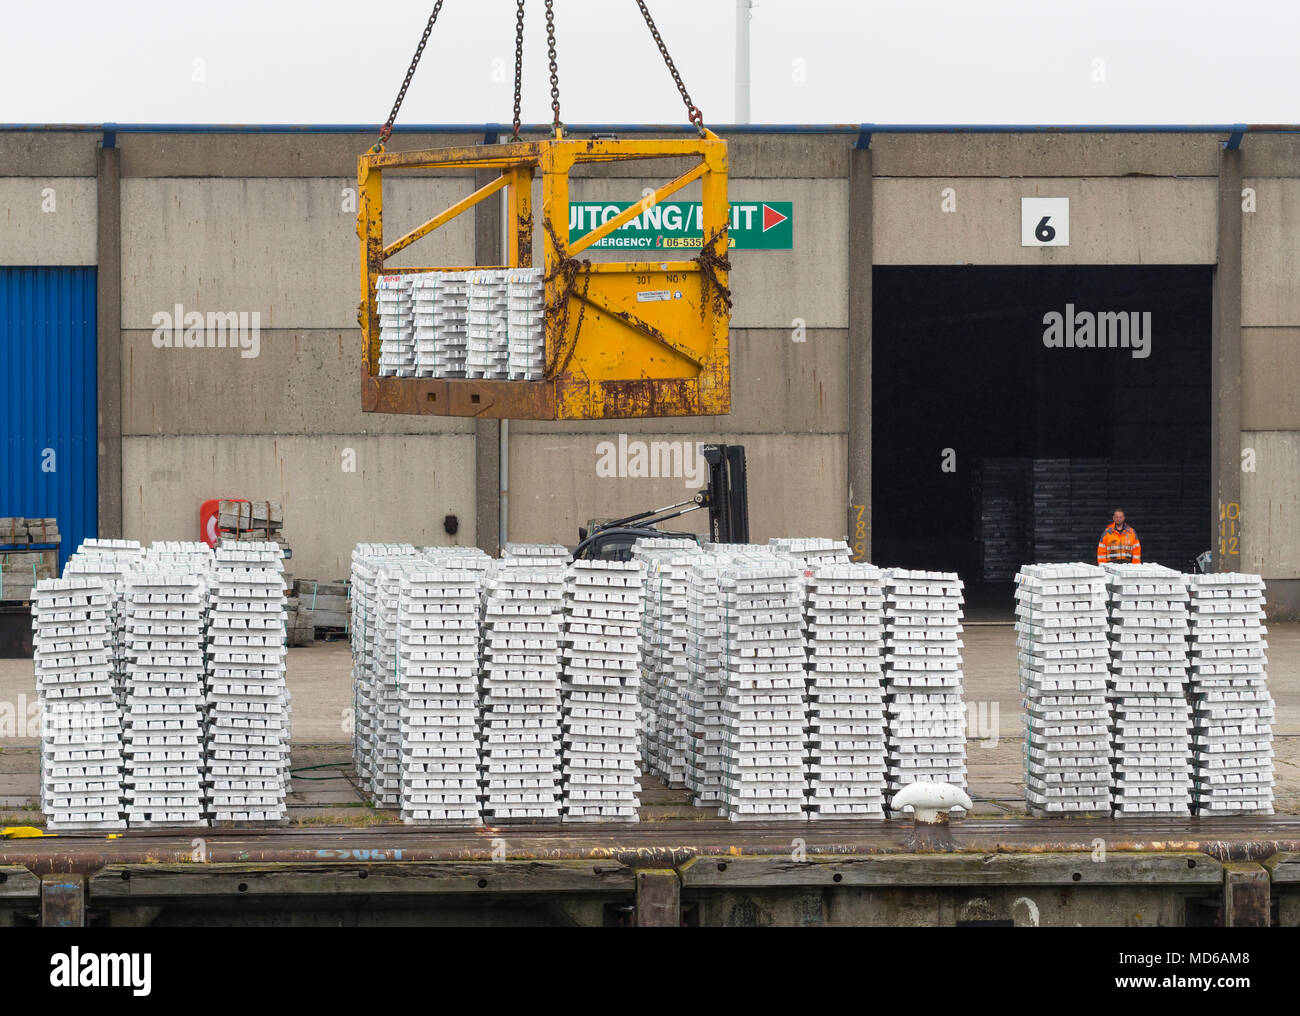 Rotterdam, Netherlands - 20 July 2015: Pallets with ingots of zinc are prepared for shipping at Europort Rotterdam, Europe's largest freight harbour. Stock Photo